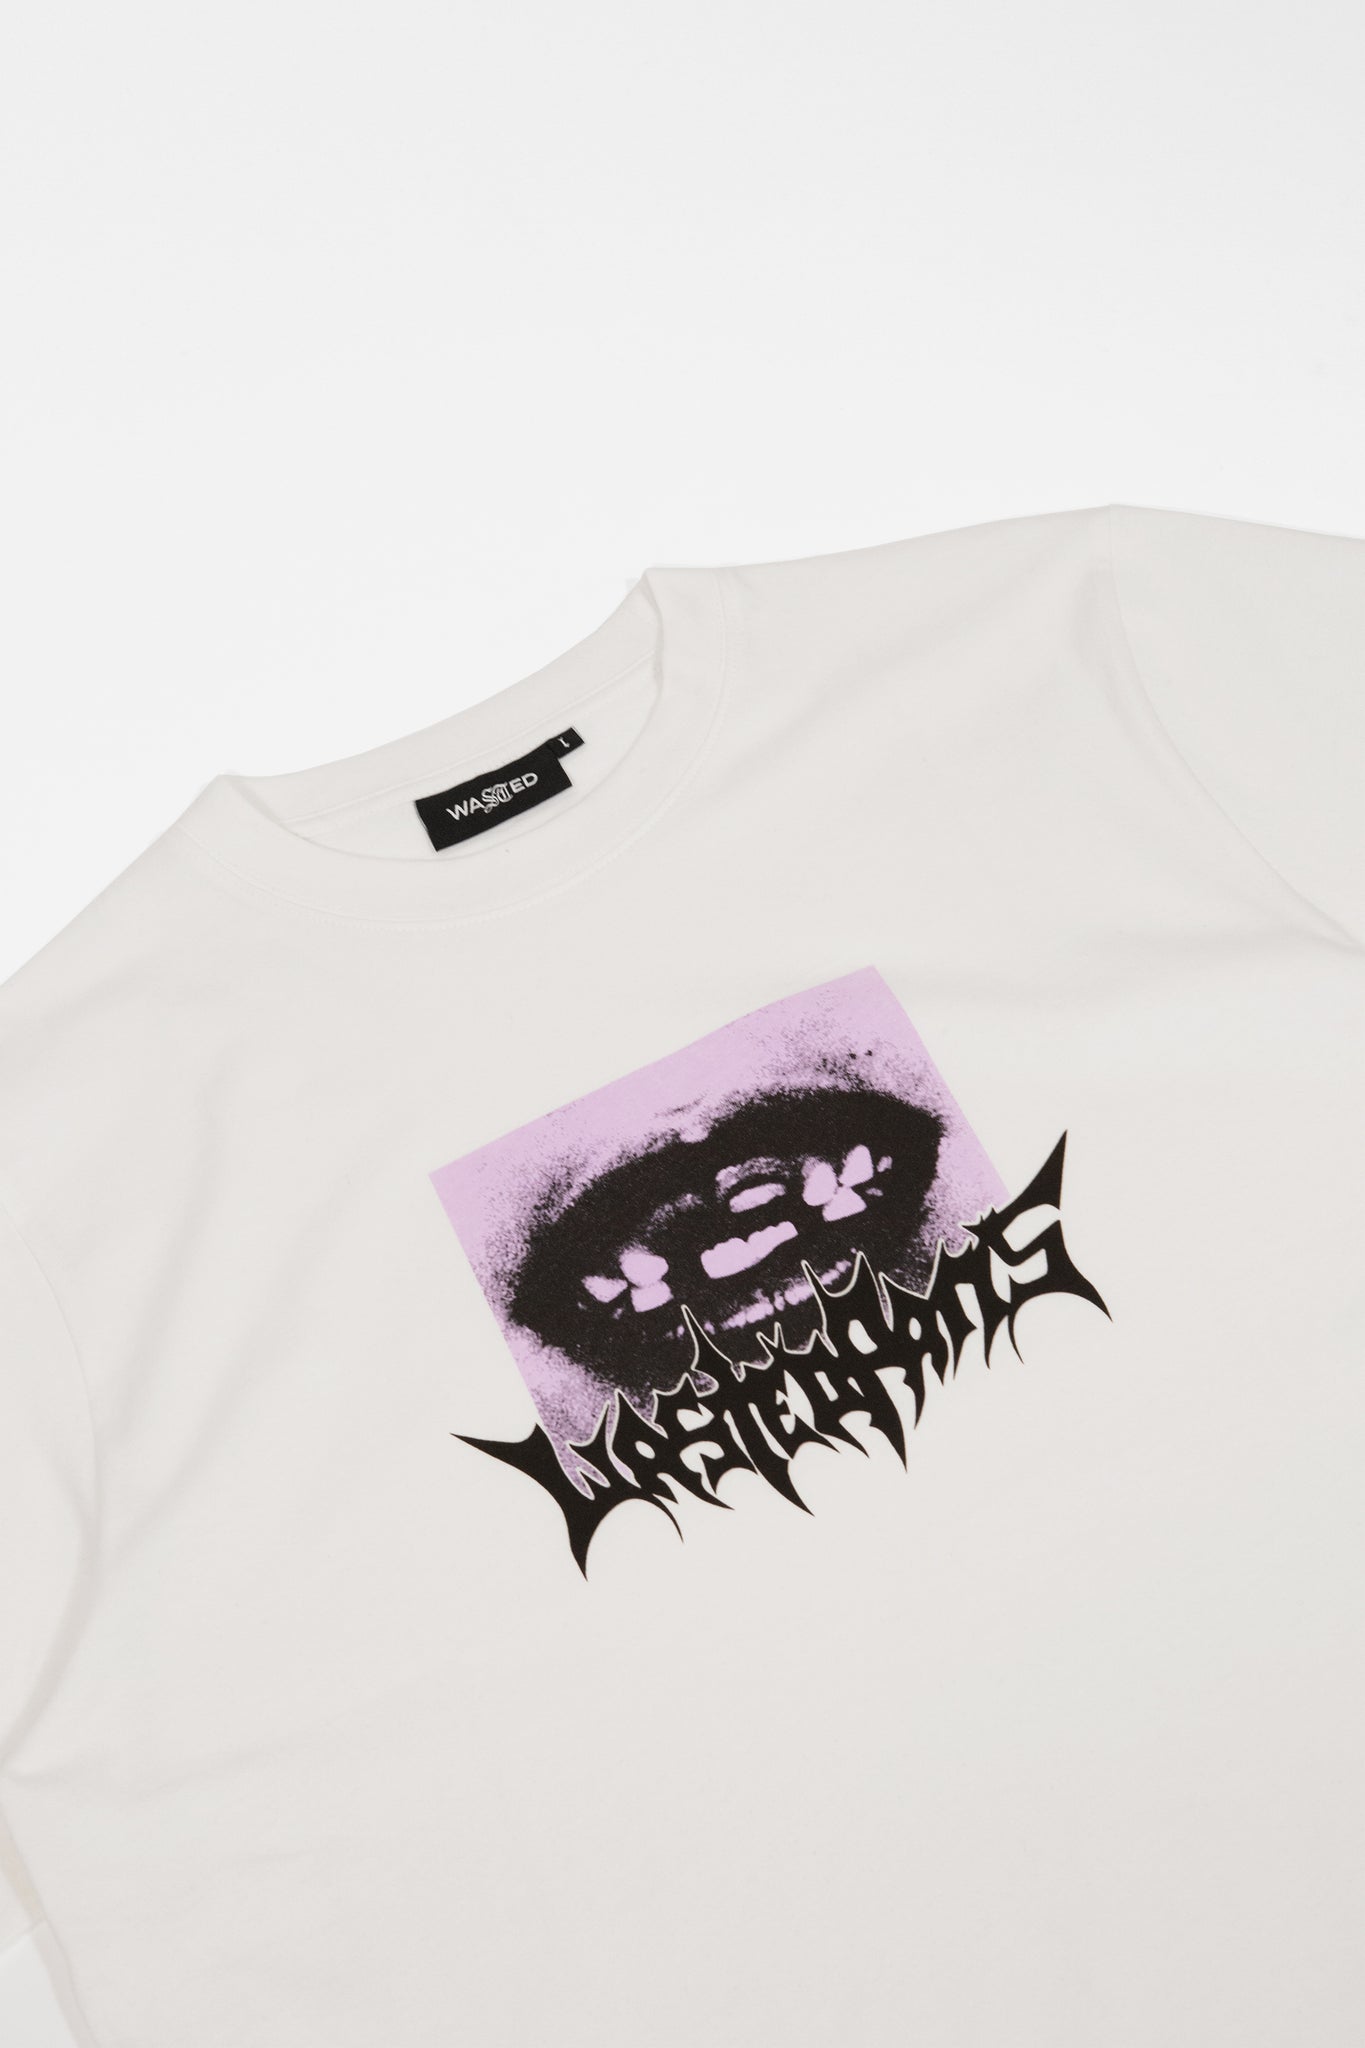 Psychocandy T-Shirt off white - Wasted Paris